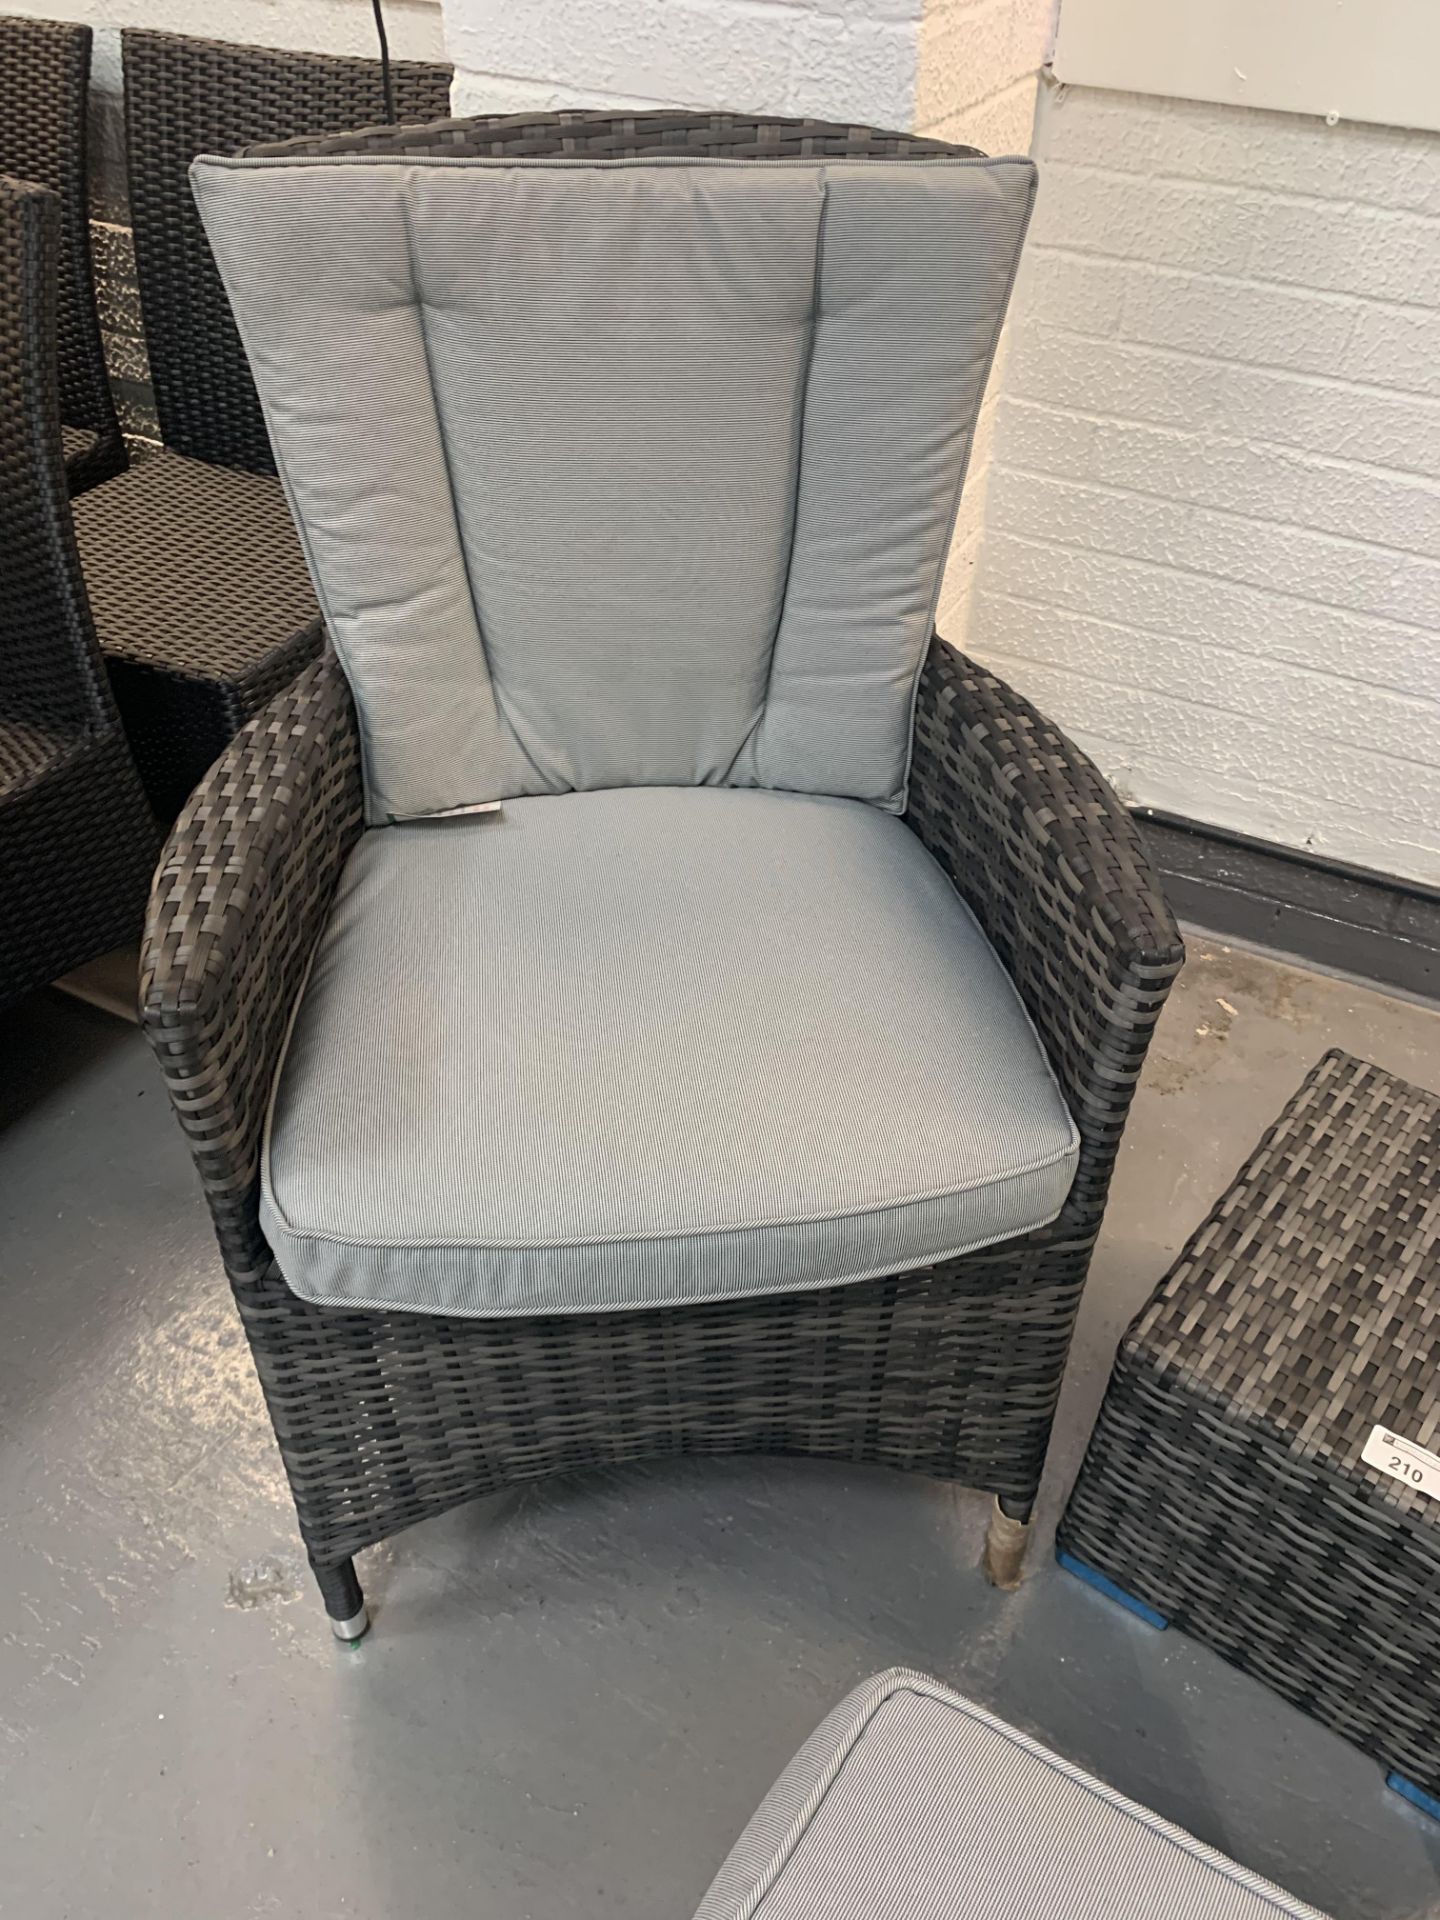 A pair of Grey Maze Rattan arm chairs 1 missing back cushion and 2 footstools - only 1 x cushion - Image 4 of 4